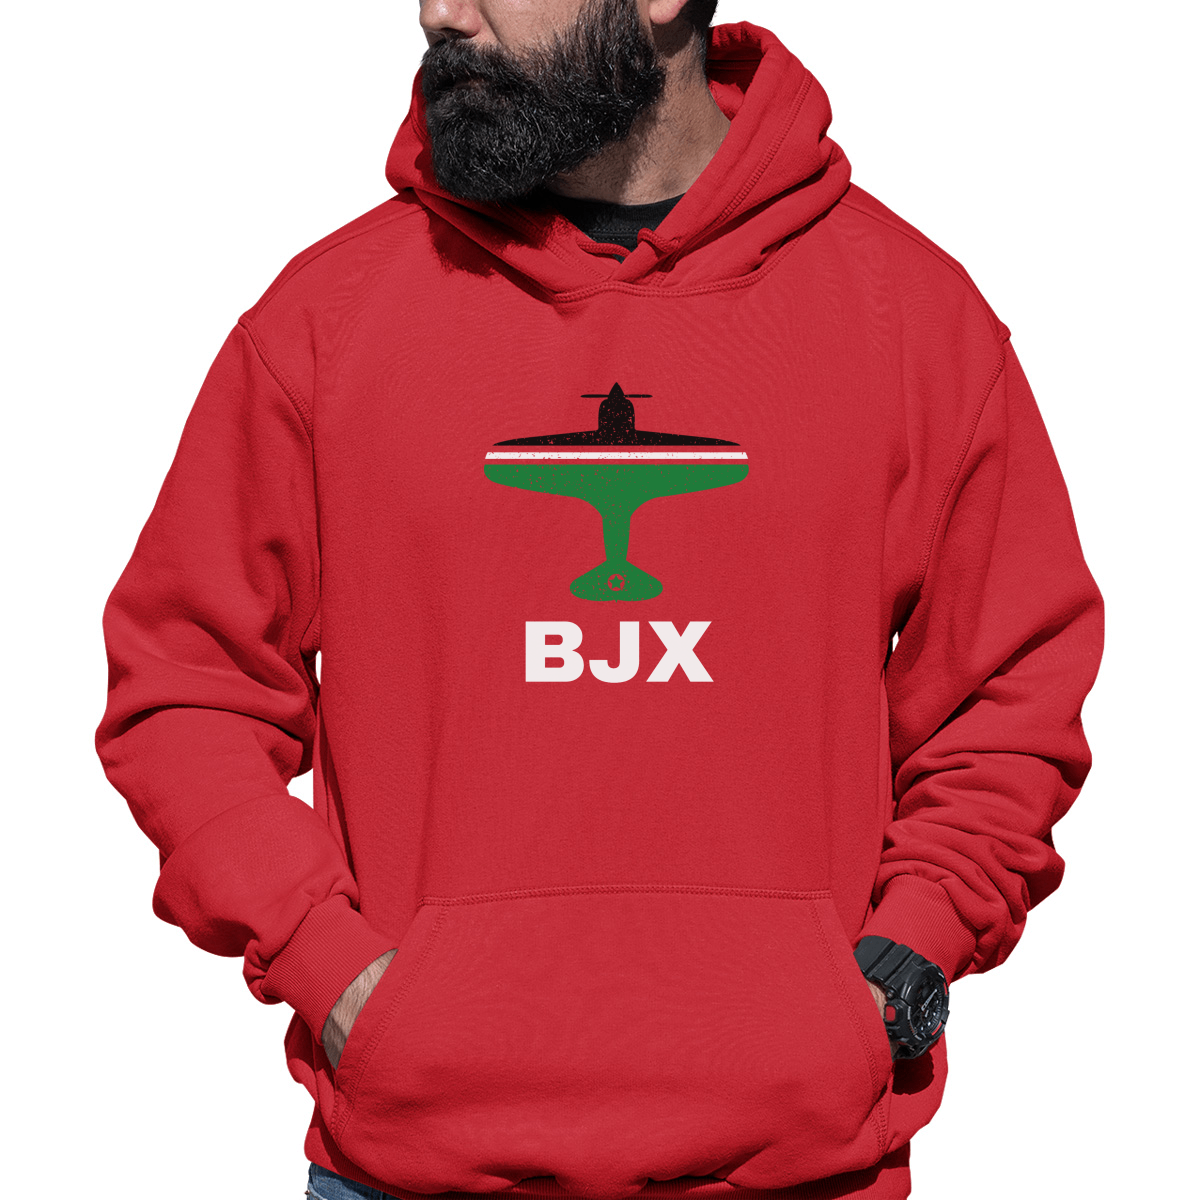 FLY Guanajuato BJX Airport Unisex Hoodie | Red